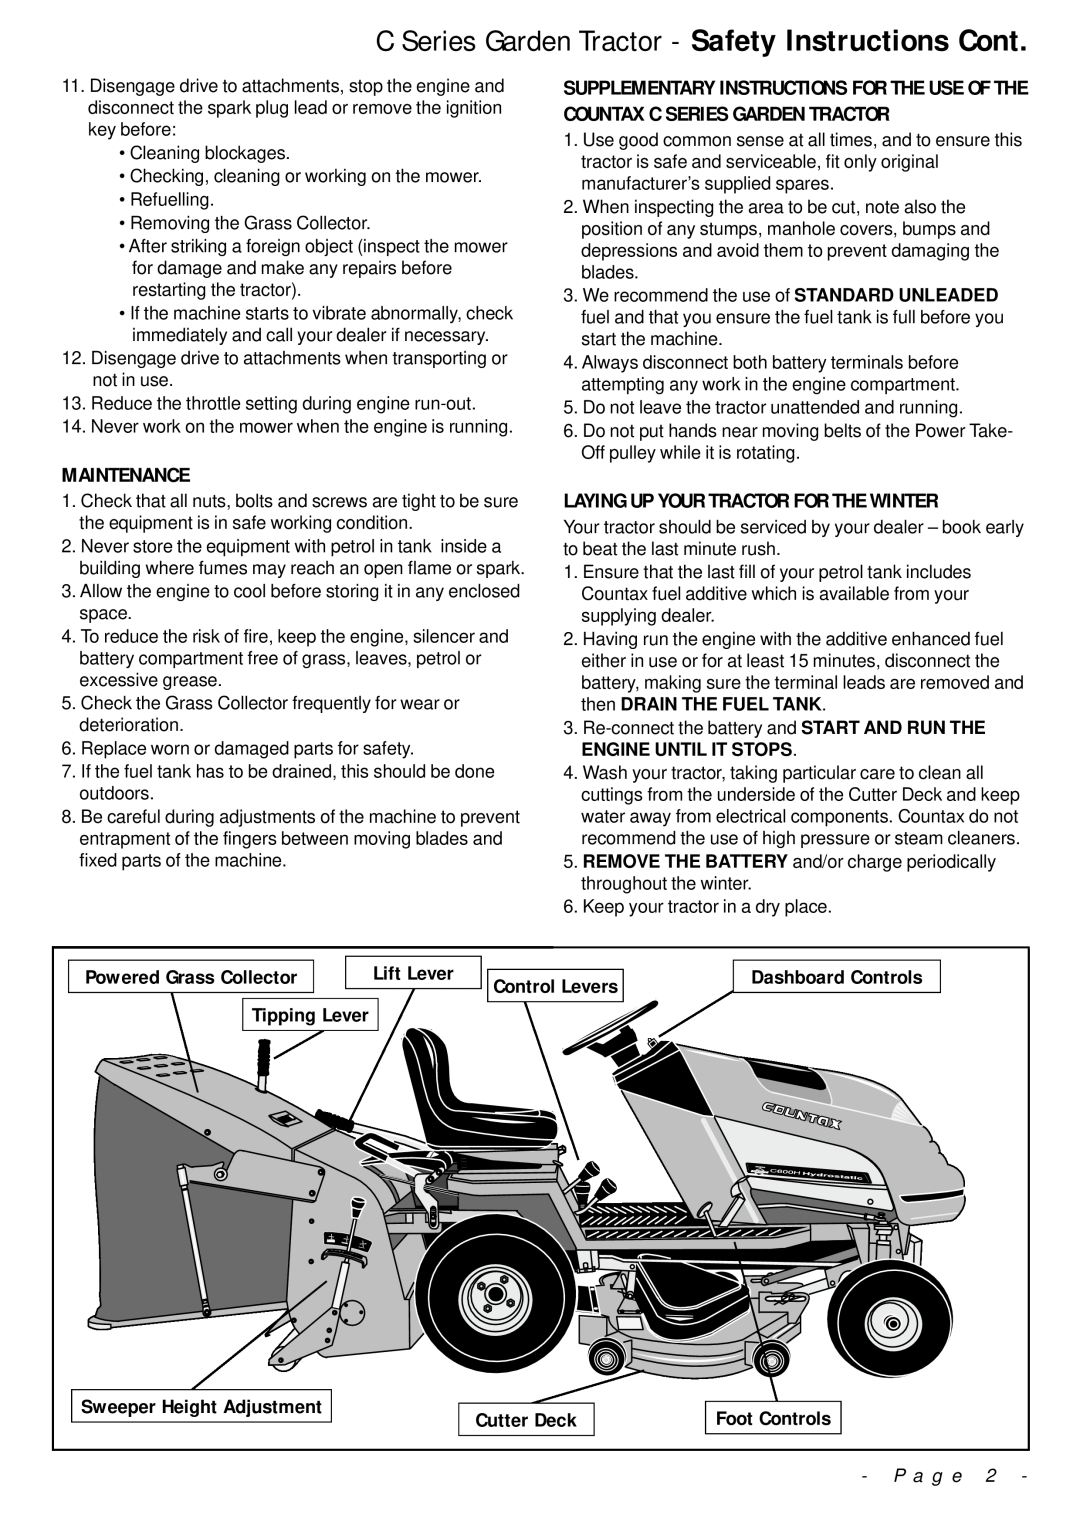 Countax C Series Garden Tractor - Safety Instructions Cont, Maintenance, Laying Up Your Tractor For The Winter, P a g e 